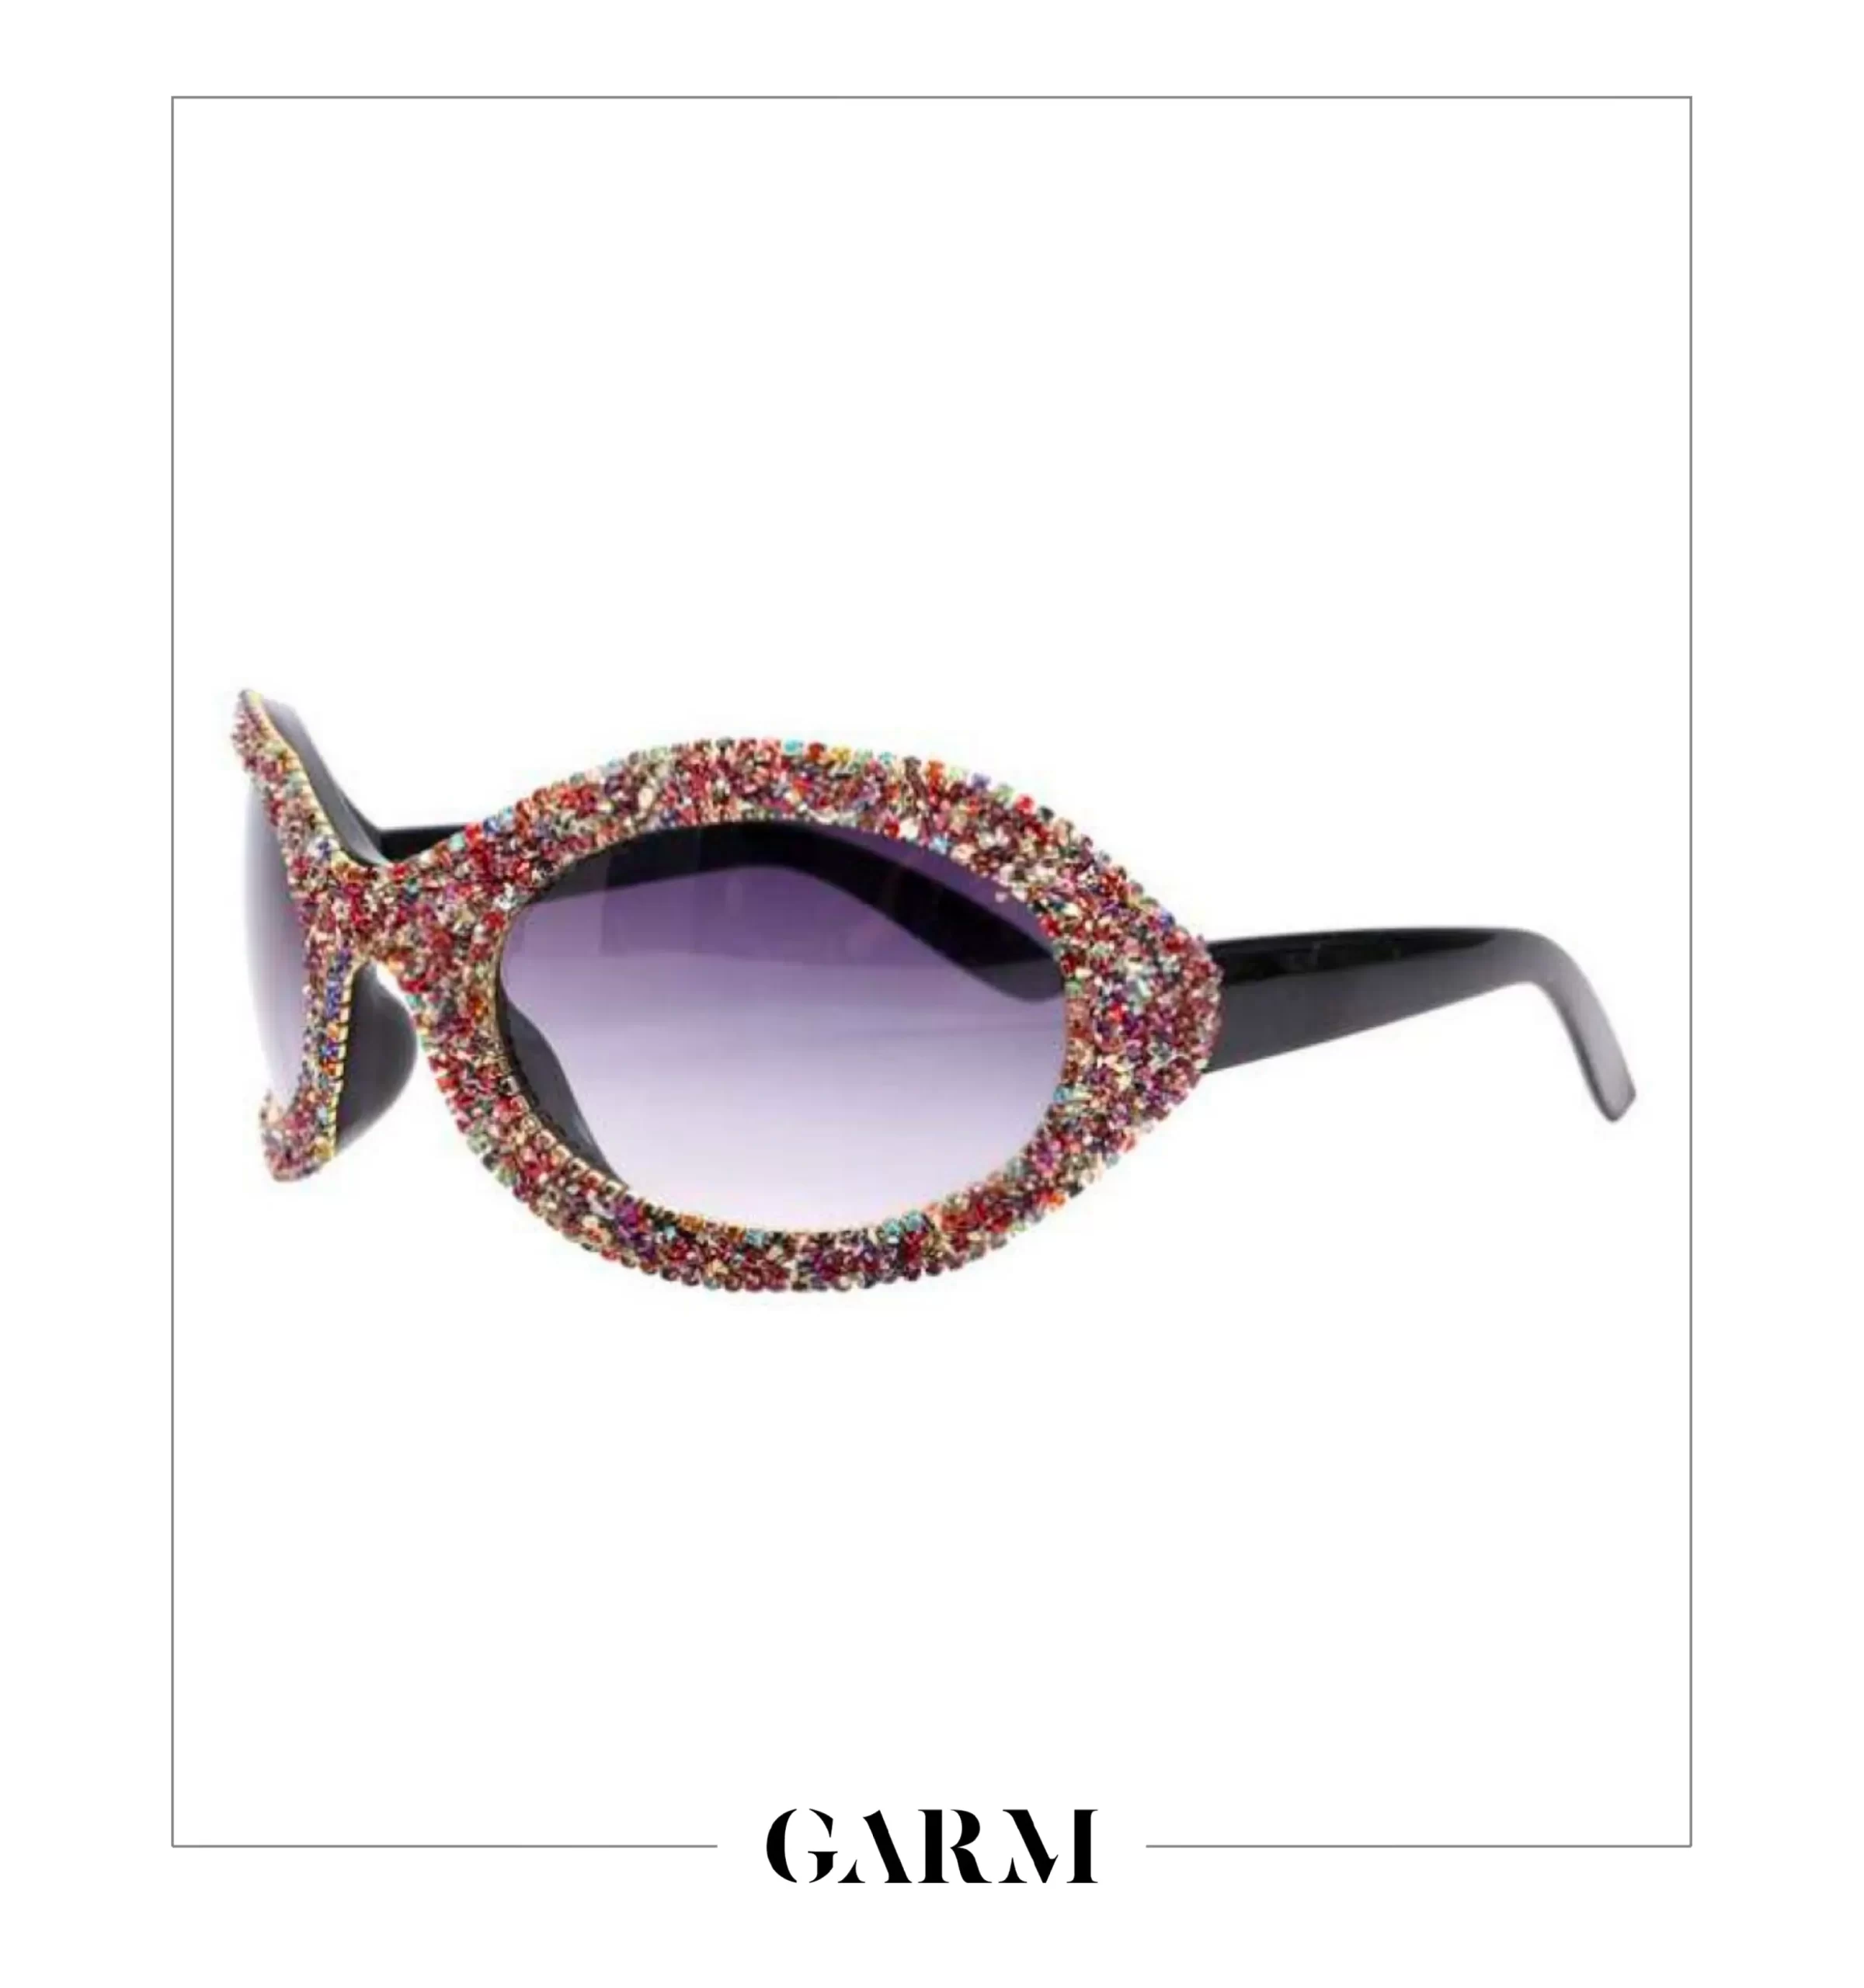 The Multi-Colour Y2K Crystal Shades made by 19941 are available exclusively on GARM